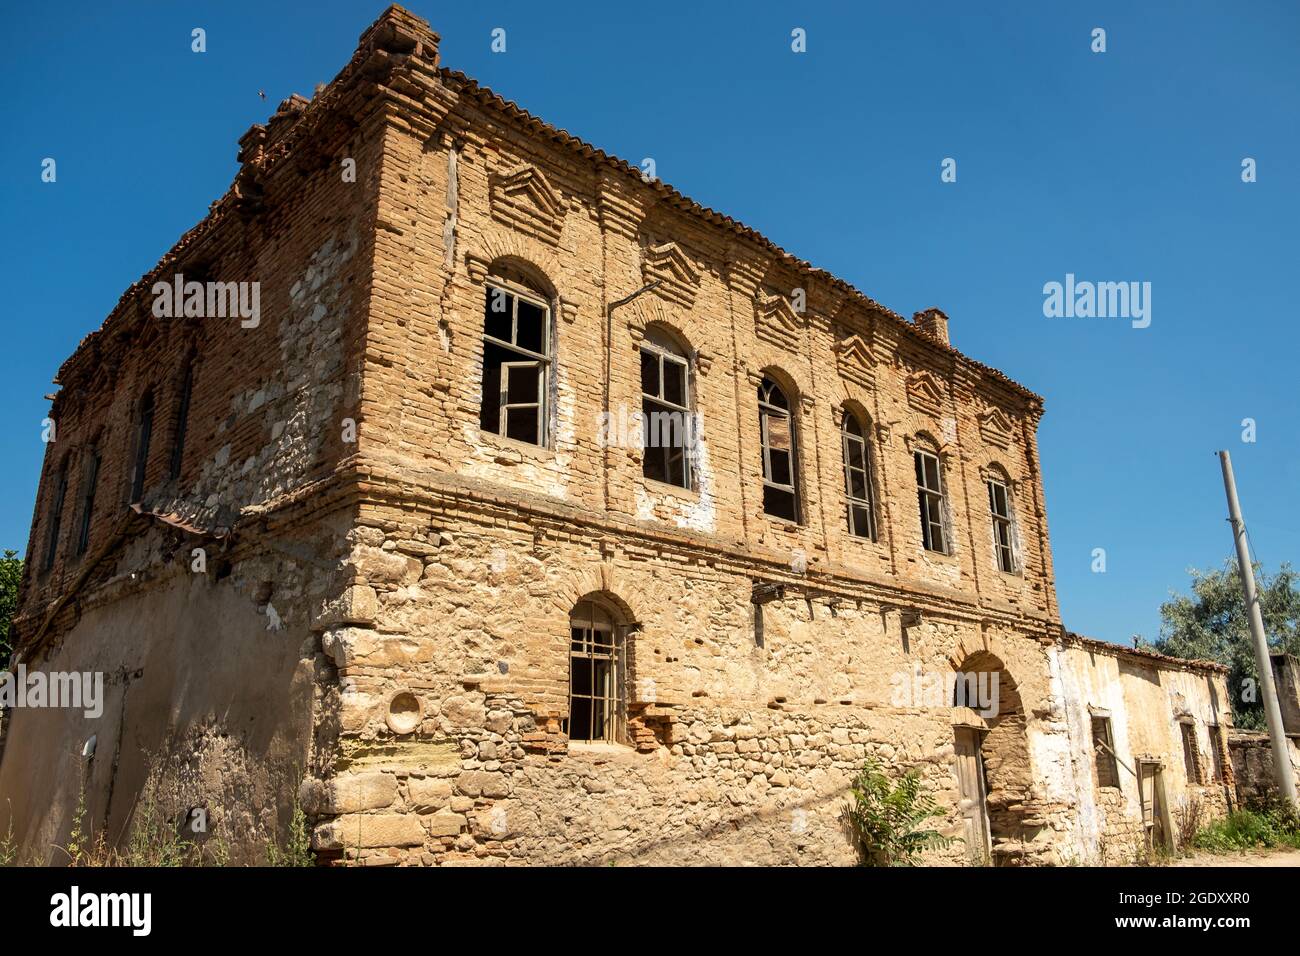 The aksu village, which is bound to the biga district of çanakkale province in turkey. there some old houses in aksu village. Stock Photo